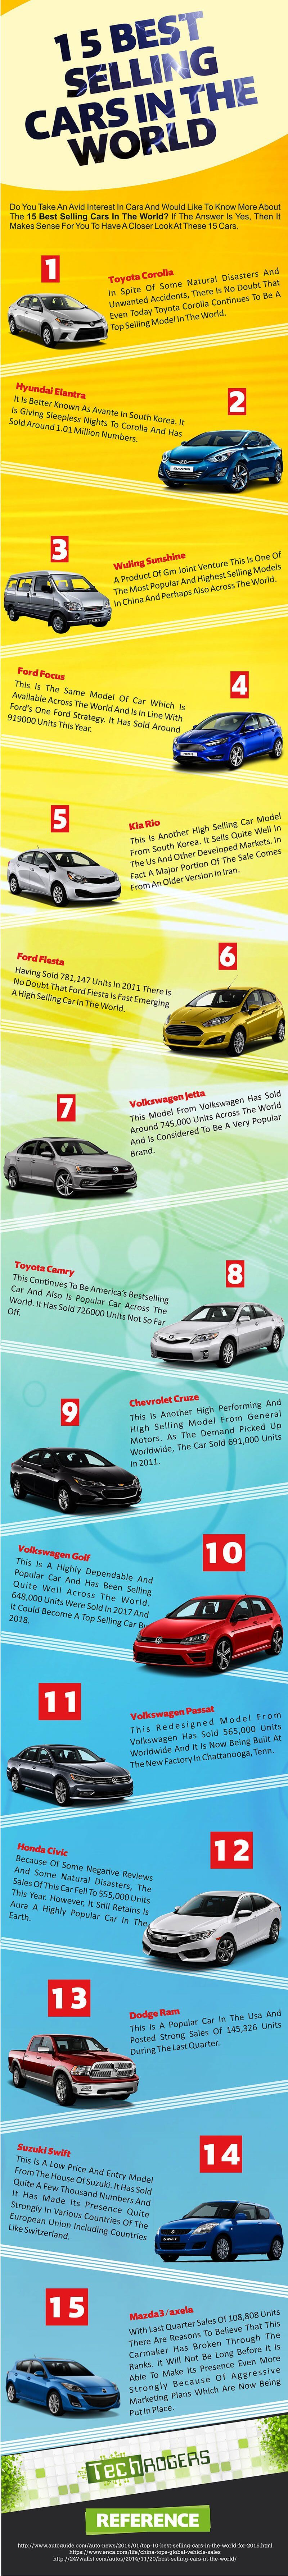 15-Best-Selling-Cars-in-the-World